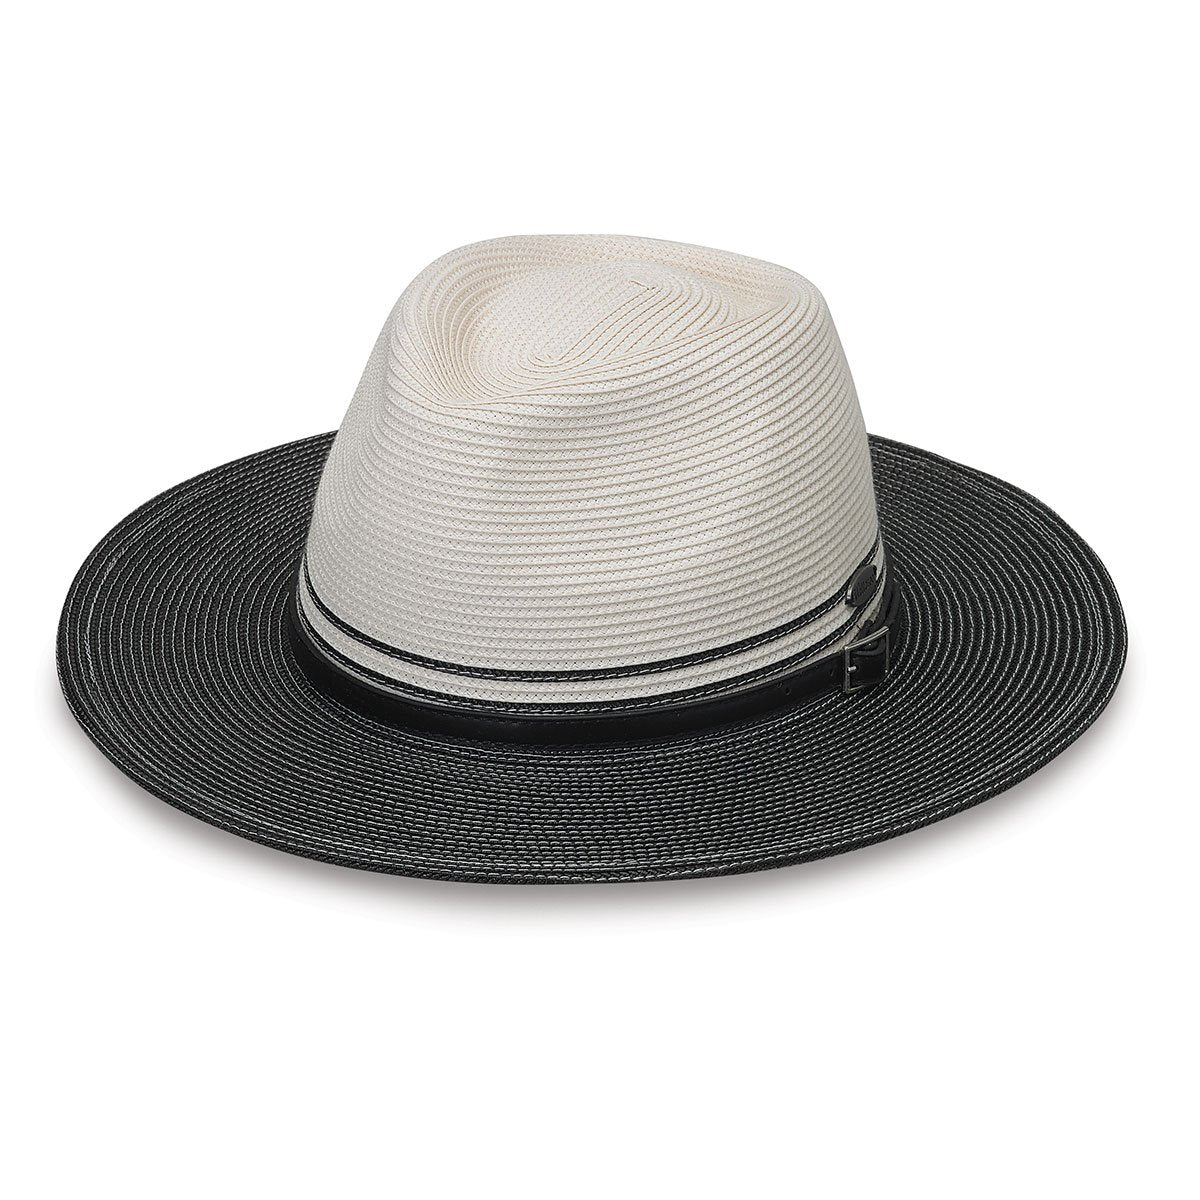 Featuring Front of Women's Packable UPF Fedora Style Kristy Sun Hat in Ivory Black from Wallaroo